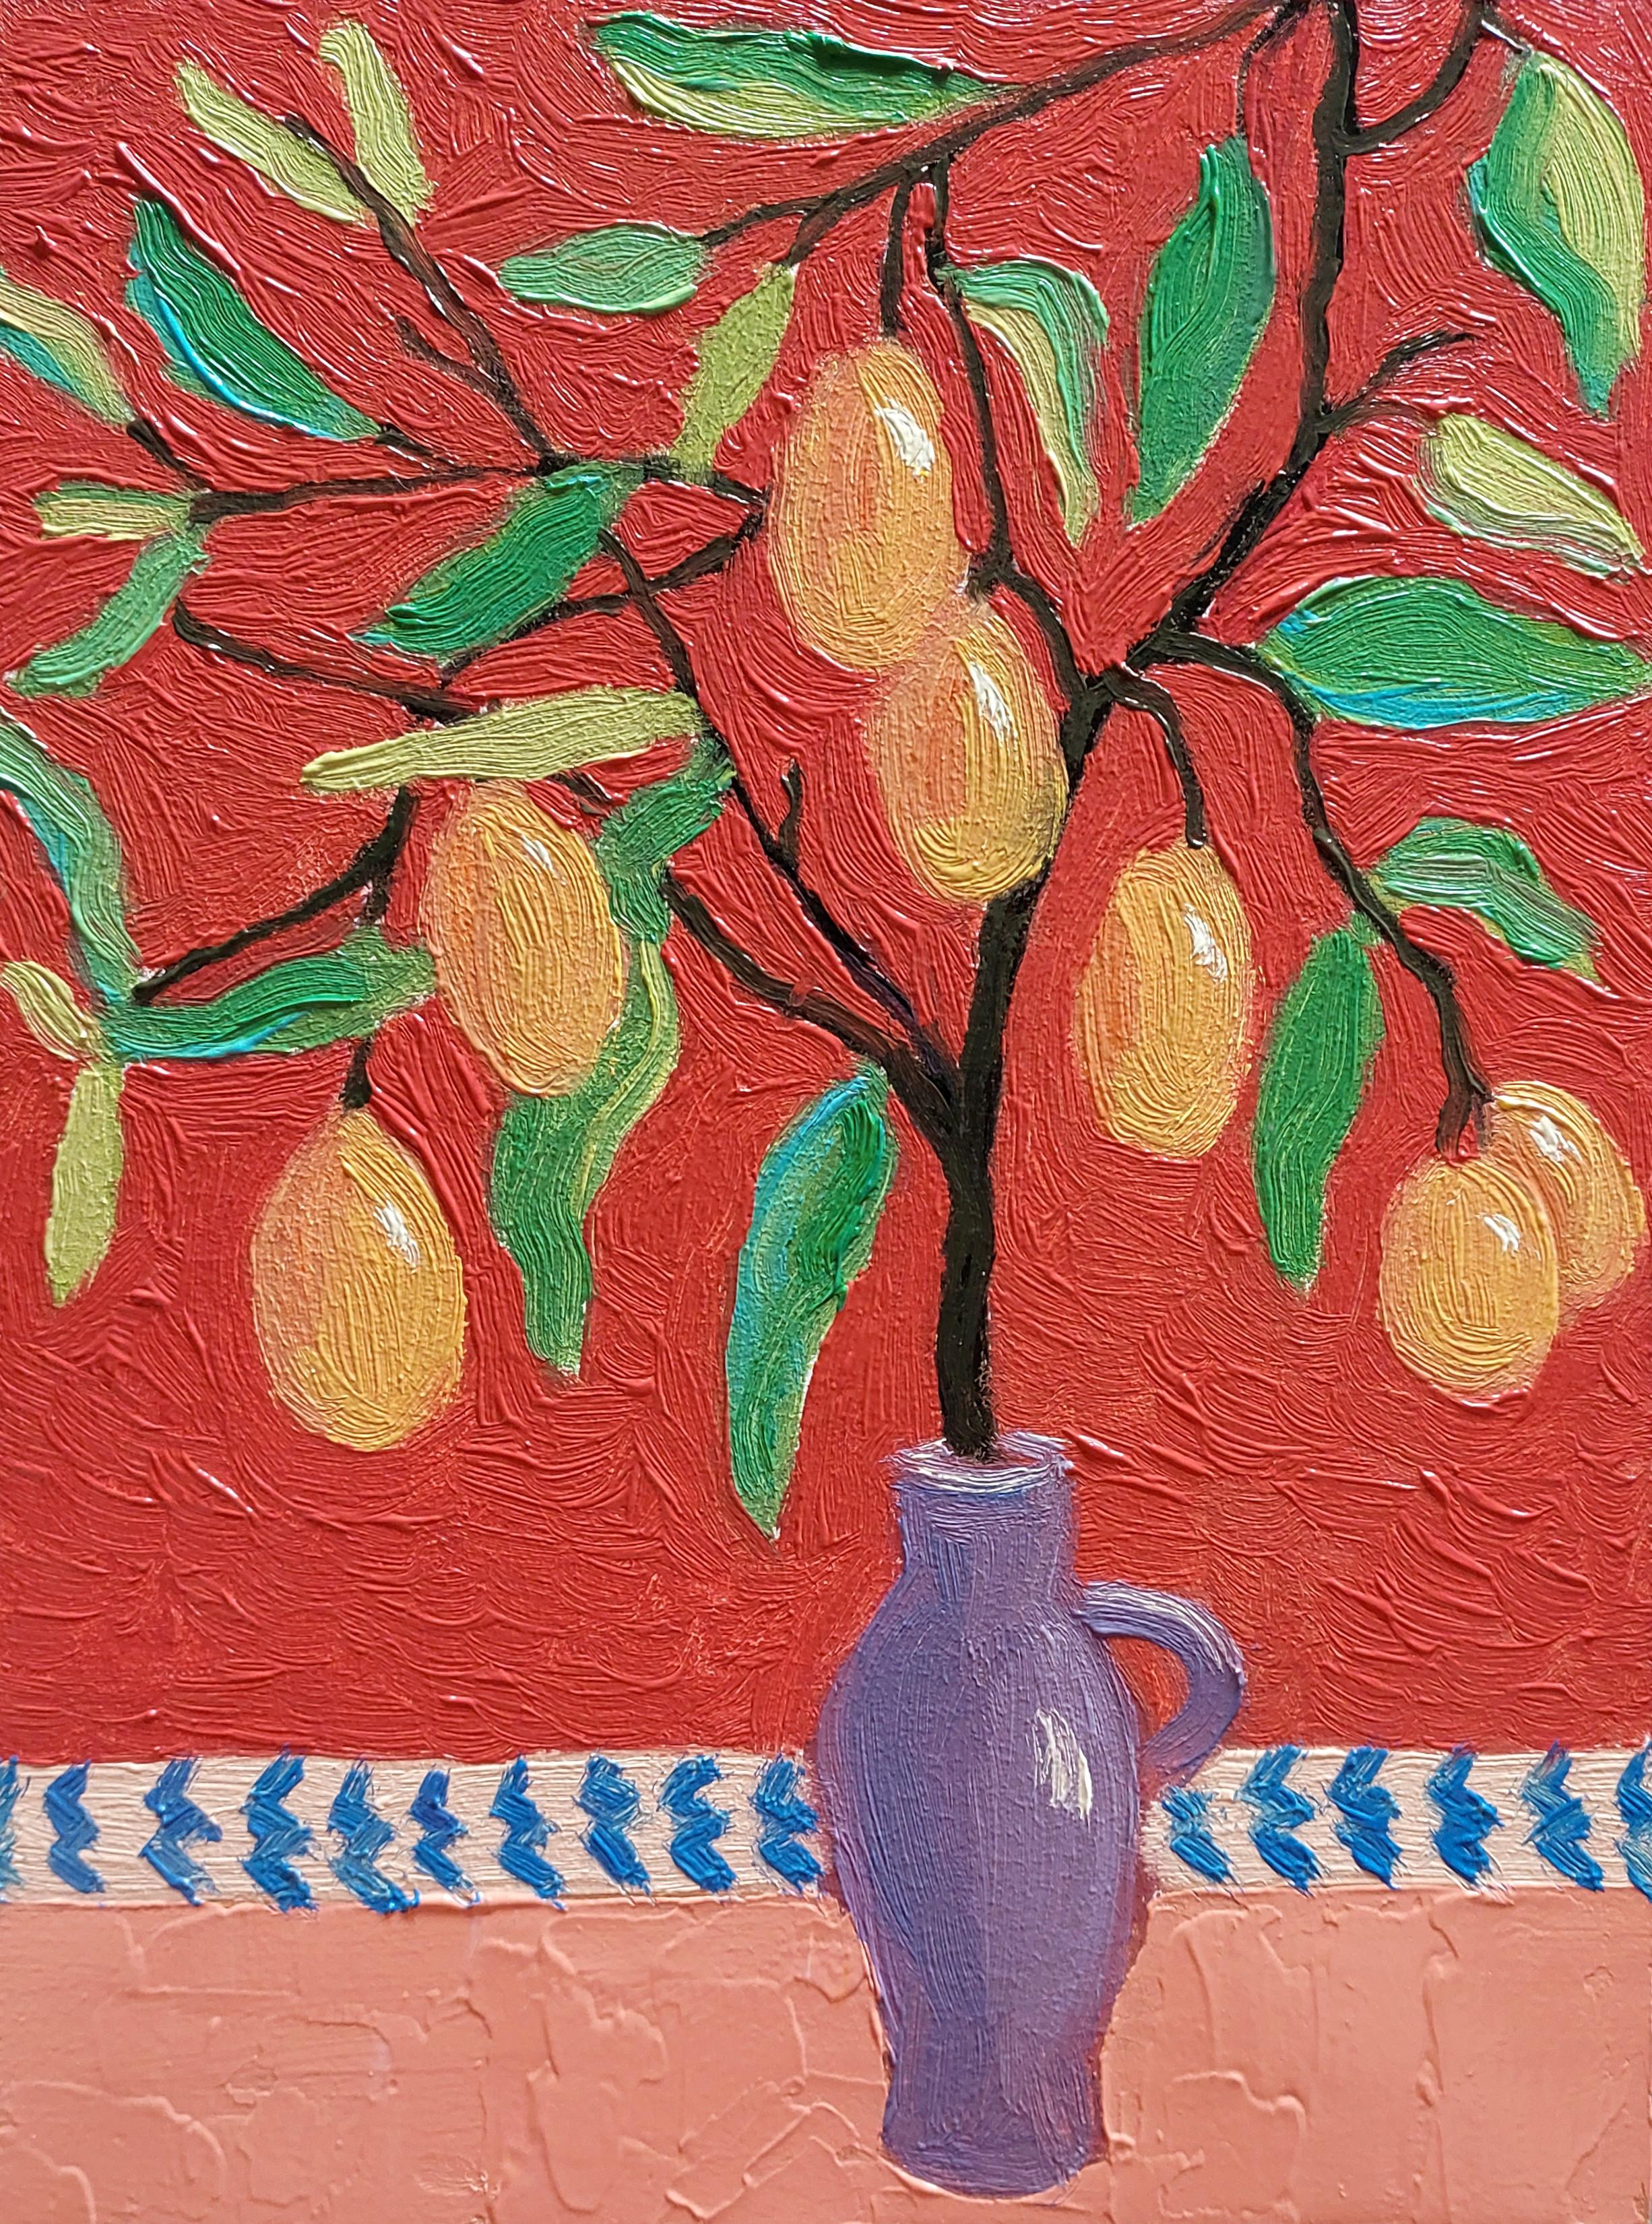 Sweet and Sour Original Oil Painting Lemon Tree by Ksenia Tsyganyuk For Sale 1